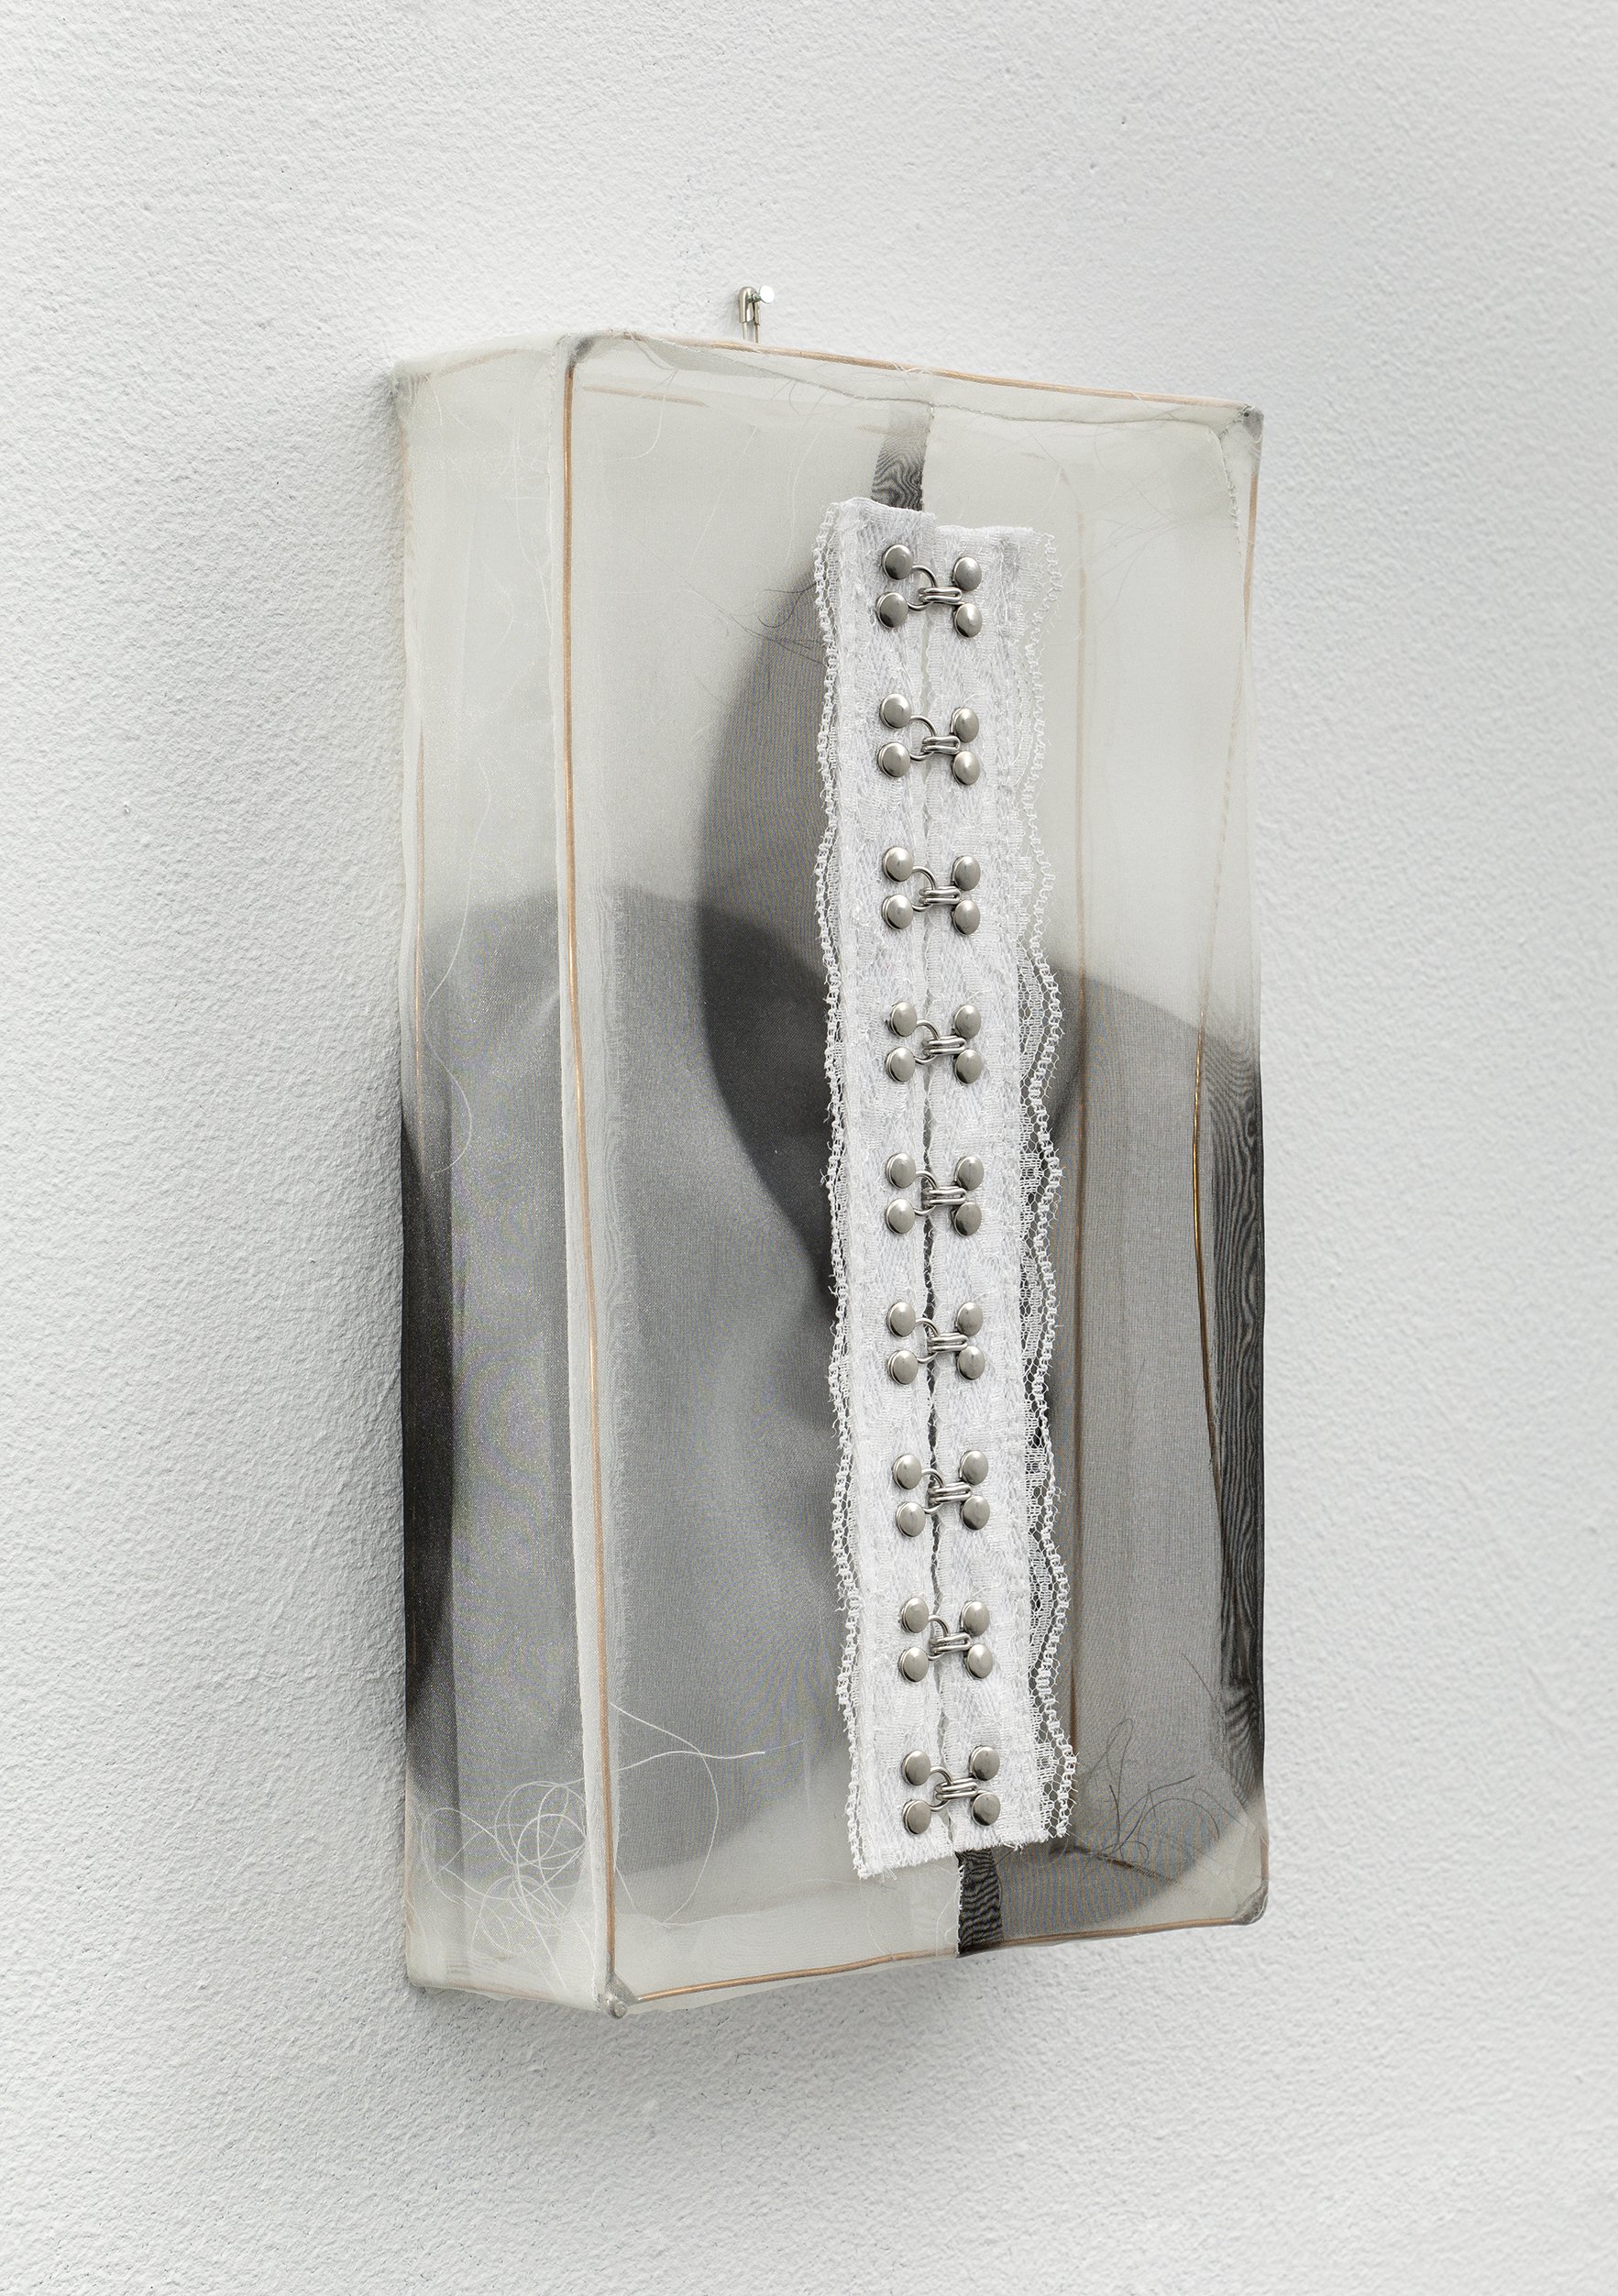  Covey Gong, Untitled, 2022. Acrylic, polyester, cotton, bronze, tin. 11 x 6 x 2.25 inches. 